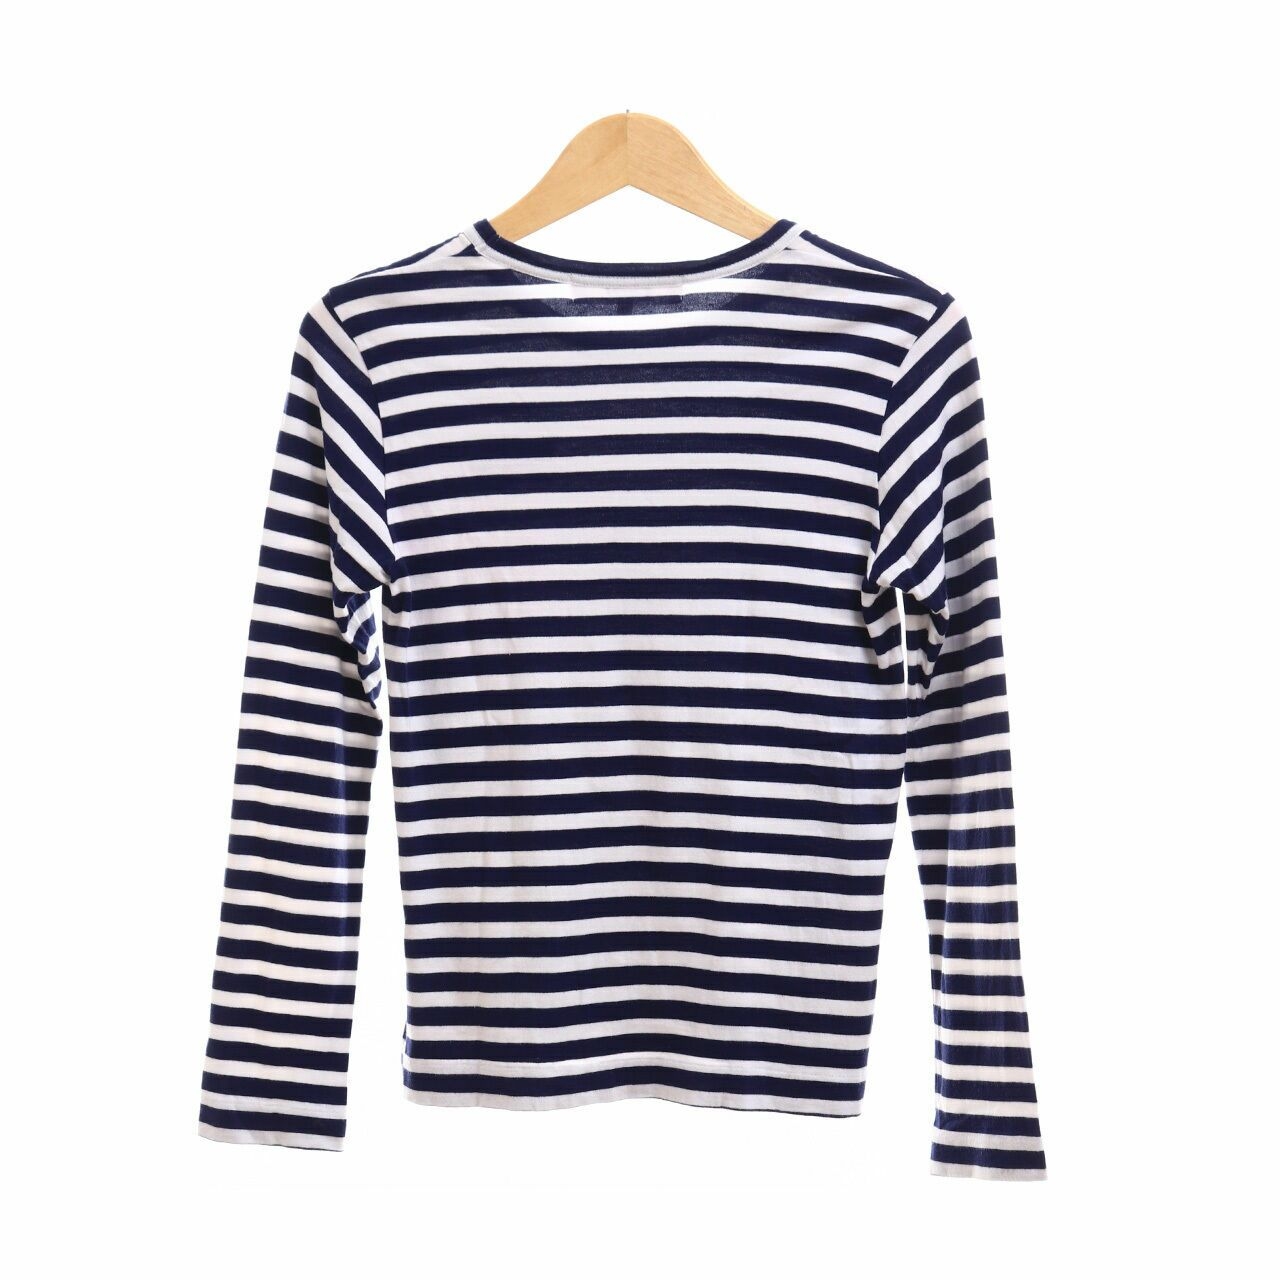 Play by Comme des Garcons White & Dark Blue Stripes T-Shirt